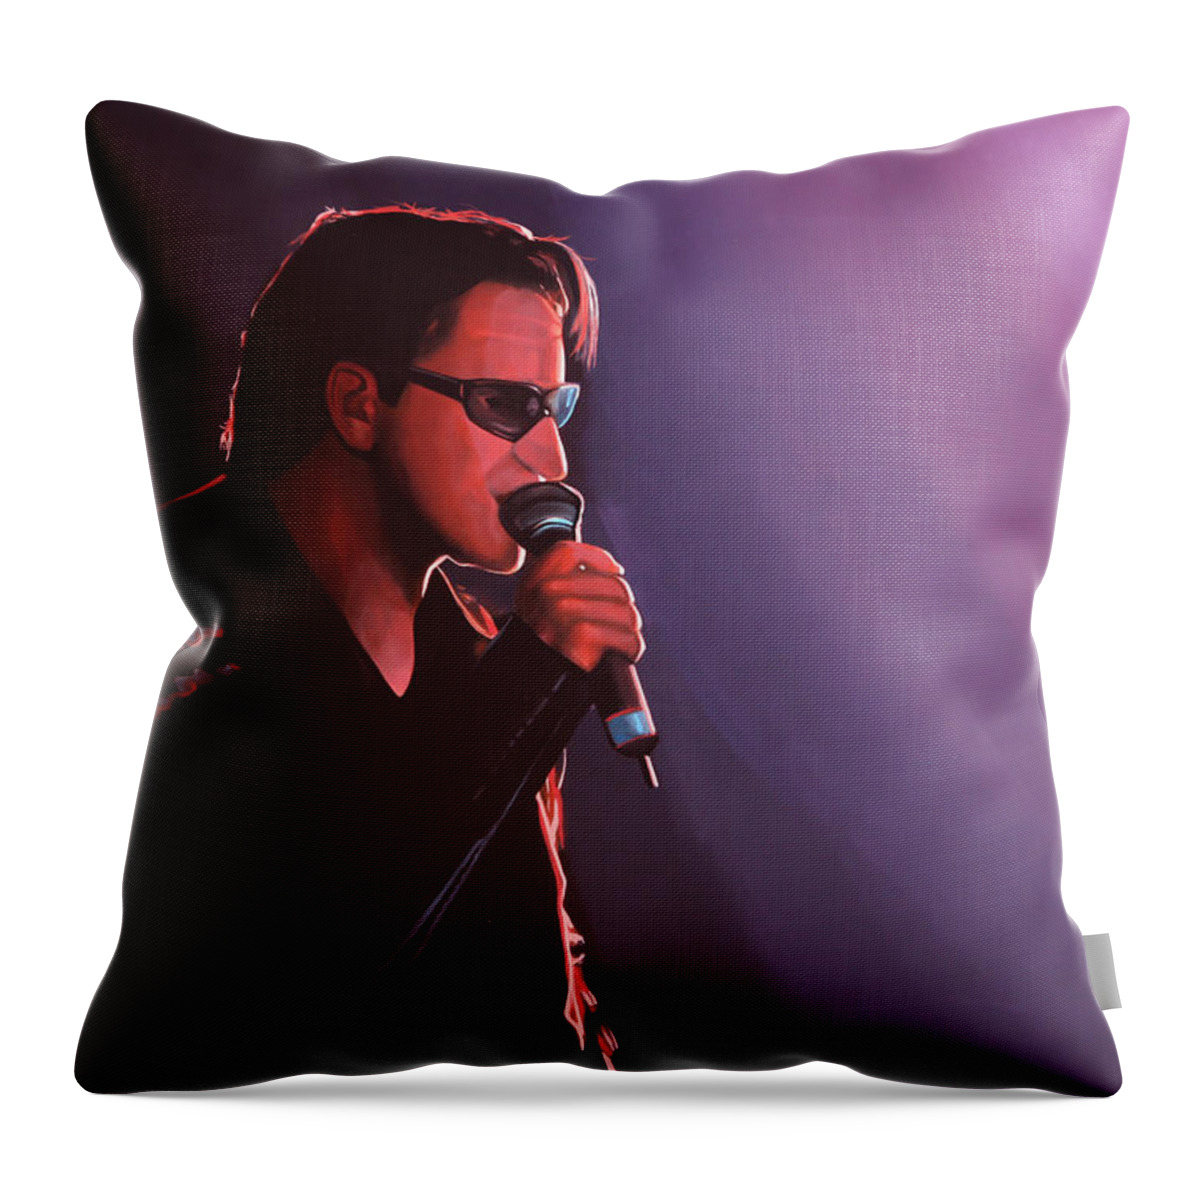 U2 Throw Pillow featuring the painting Bono U2 by Paul Meijering